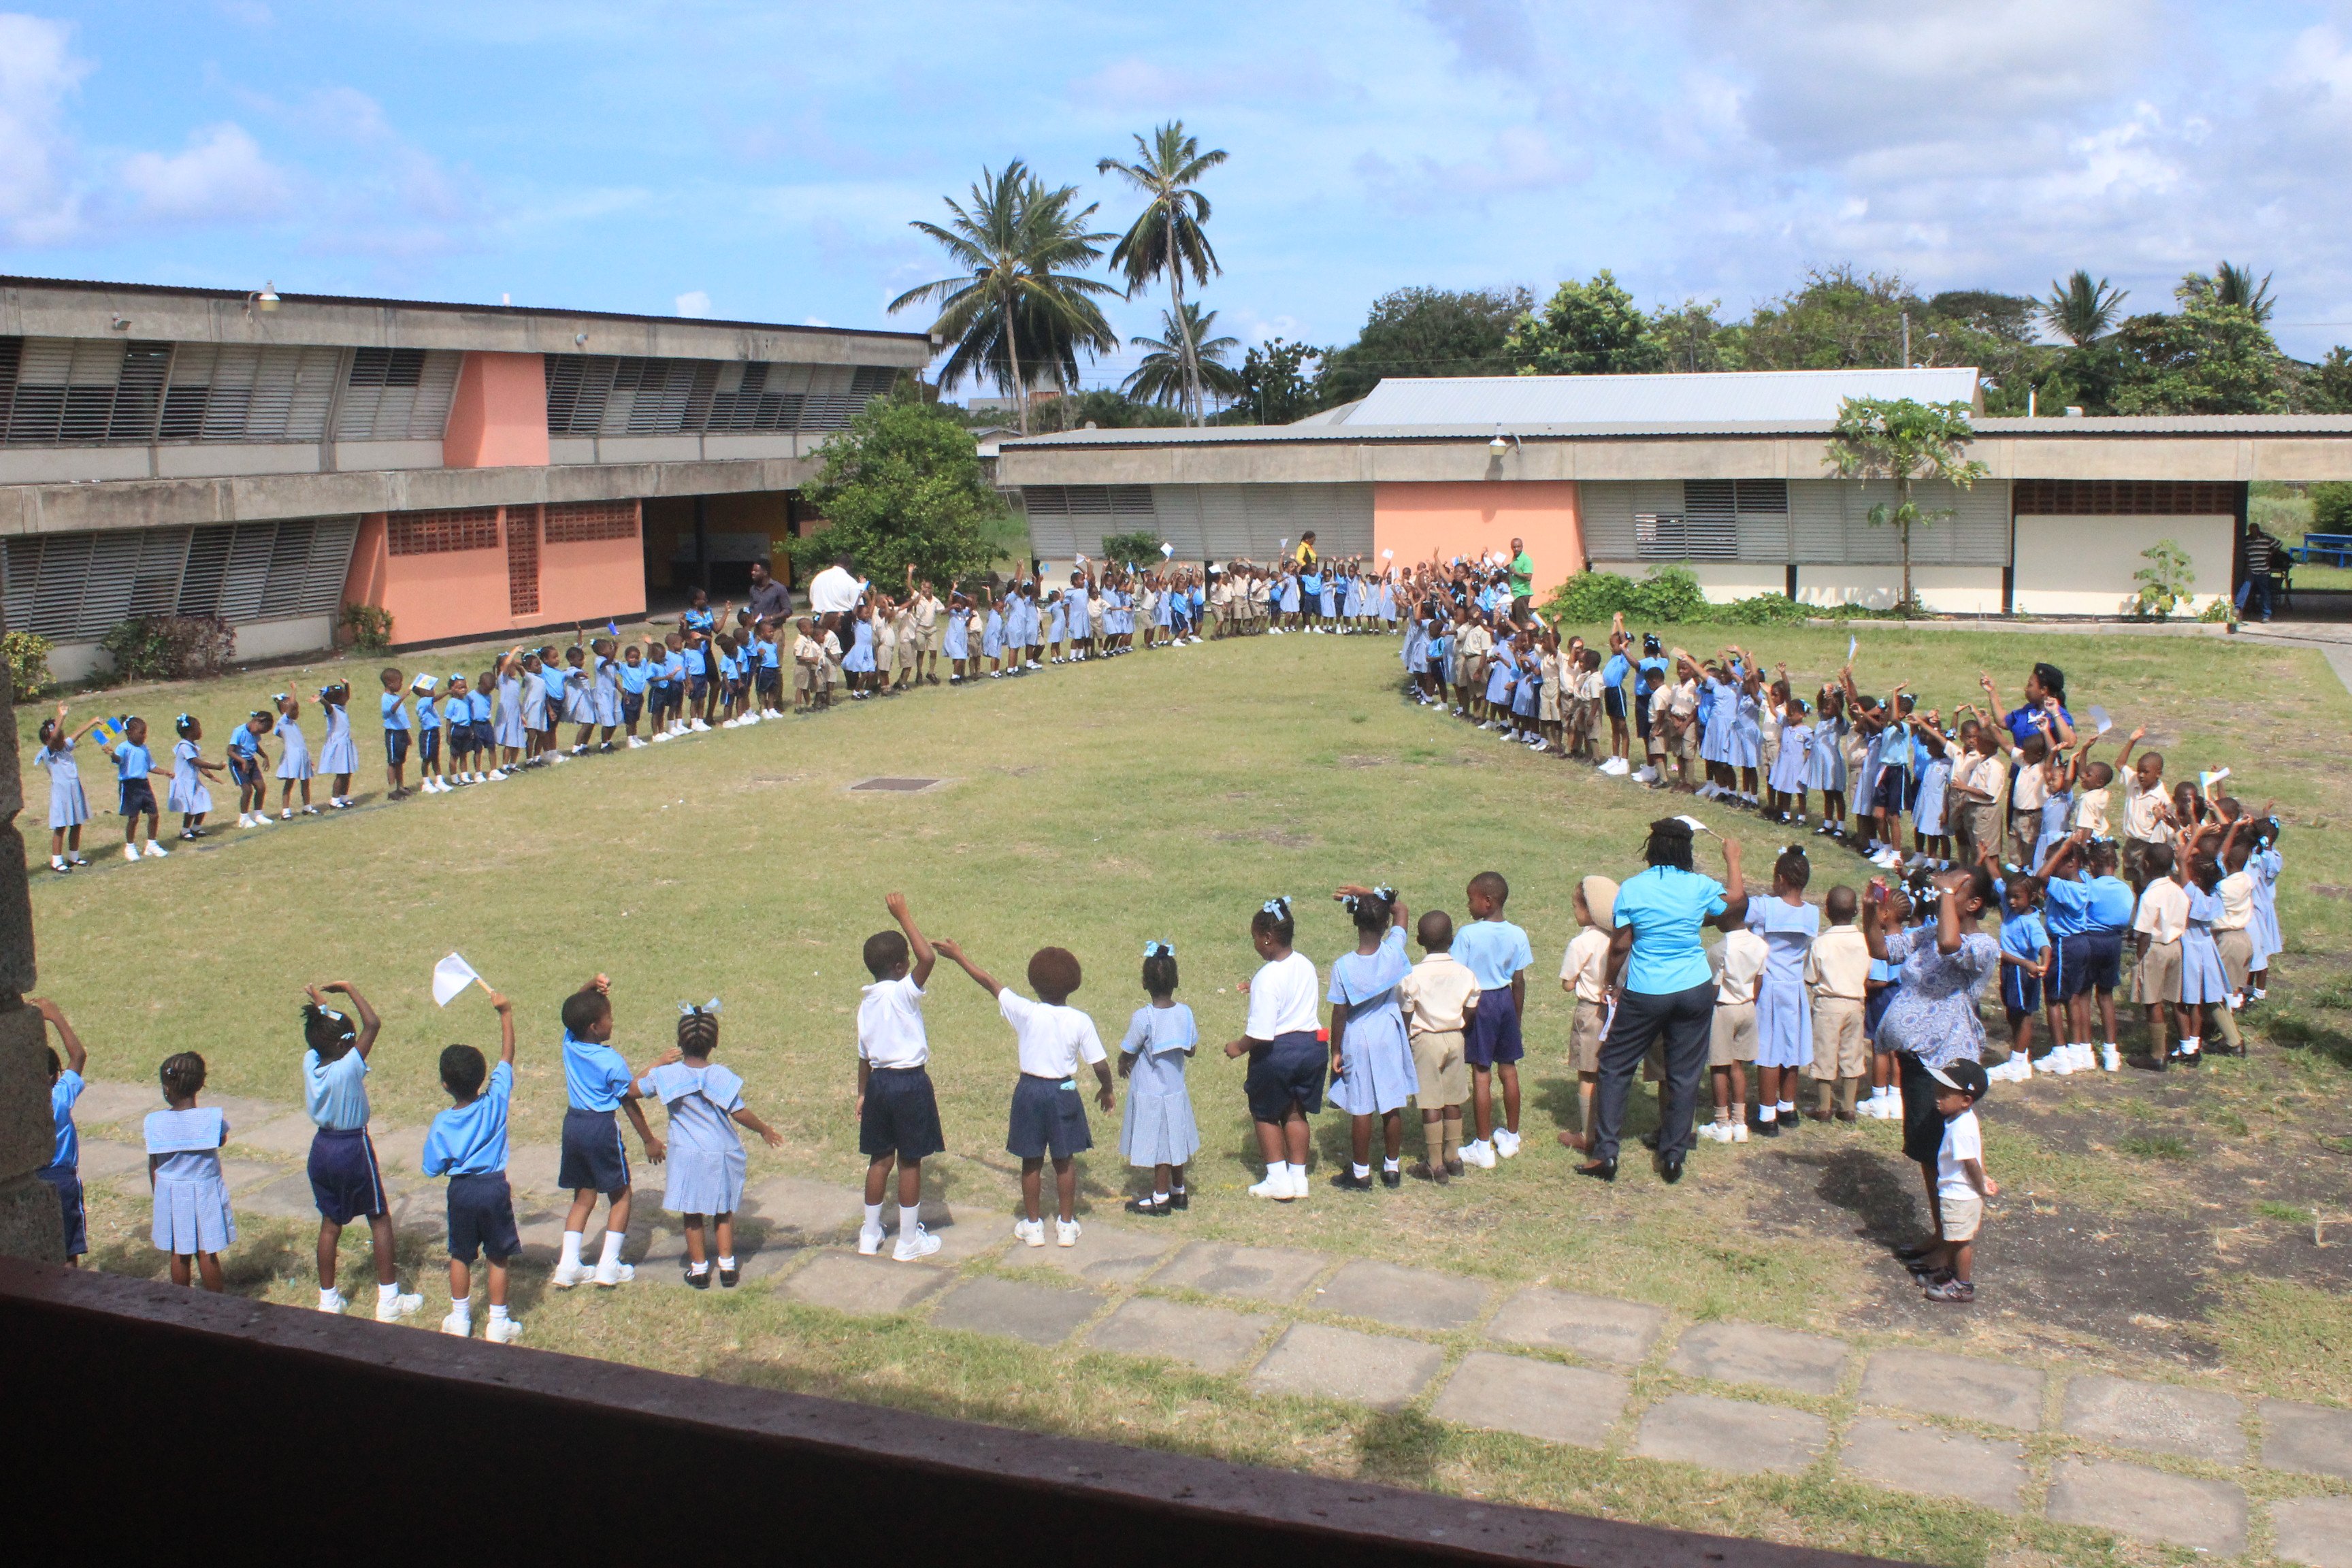 Tamara Alleyne on X: "@Taylored2jump ❤❤❤ So this happened today! Students  at Luther Thorne Memorial Primary School in the shape of #Barbados❤❤  #TammyLuvsBIM🇧🇧 https://t.co/BKJ3eMTZ9g" / X